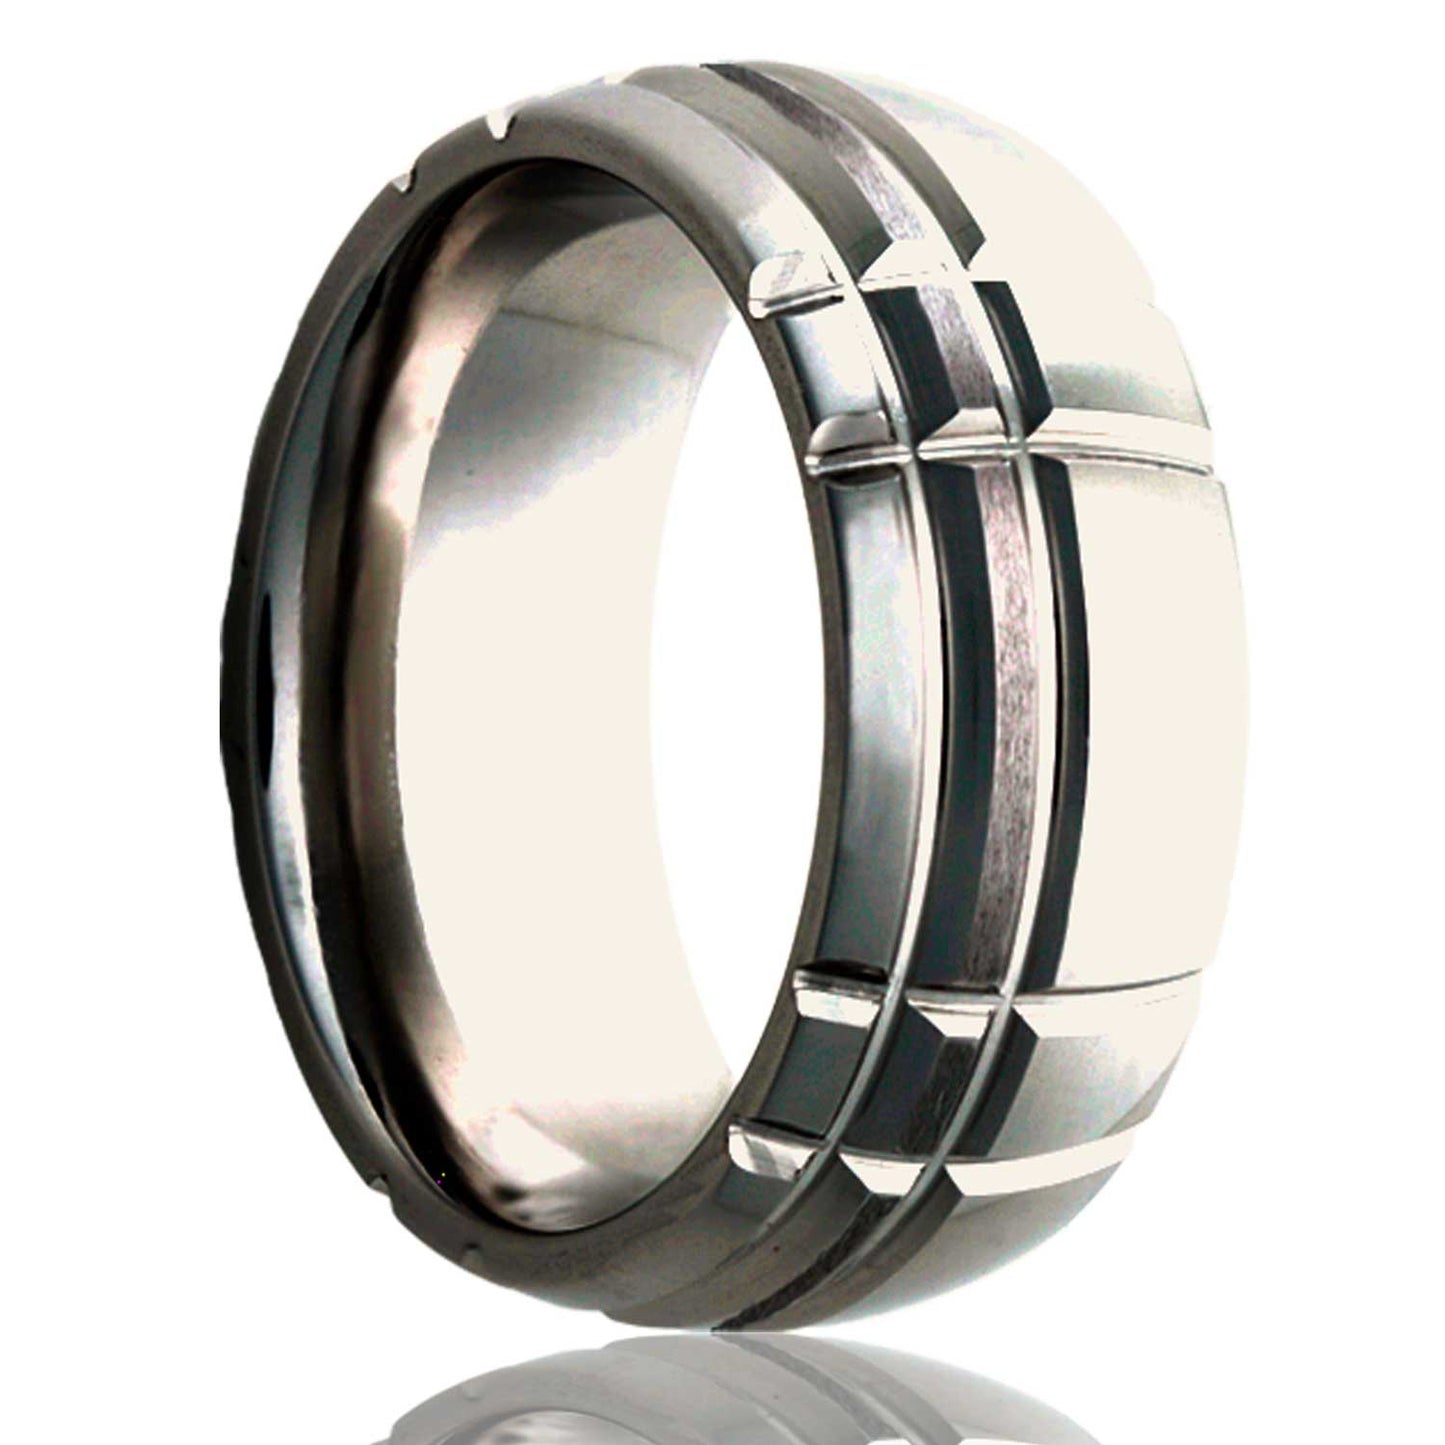 A asymmetrical intersecting grooves domed satin finish cobalt wedding band displayed on a neutral white background.